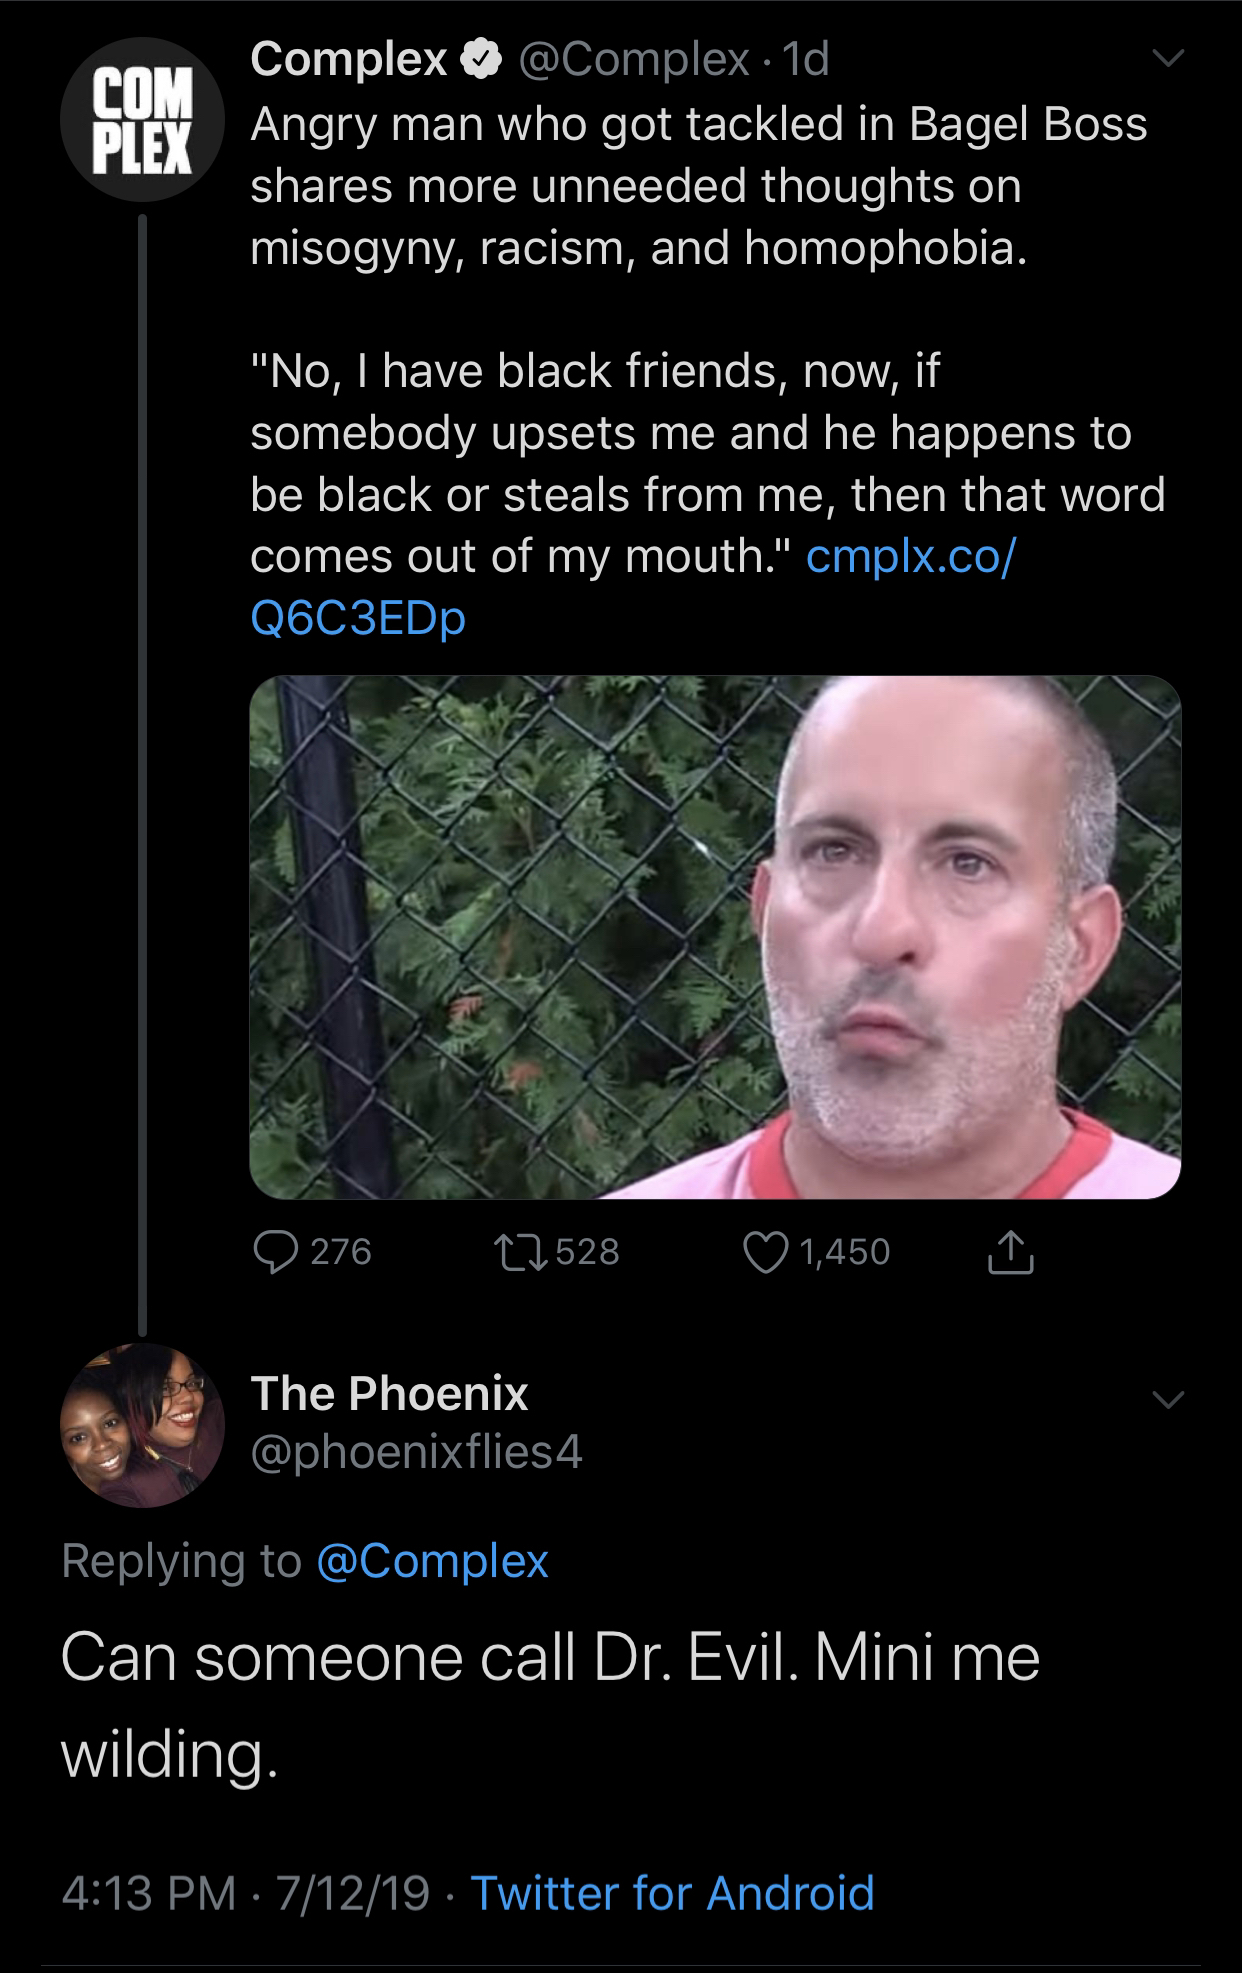 screenshot - Complex . Id Angry man who got tackled in Bagel Boss more unneeded thoughts on misogyny, racism, and homophobia. "No, I have black friends, now, if somebody upsets me and he happens to be black or steals from me, then that word comes out of m